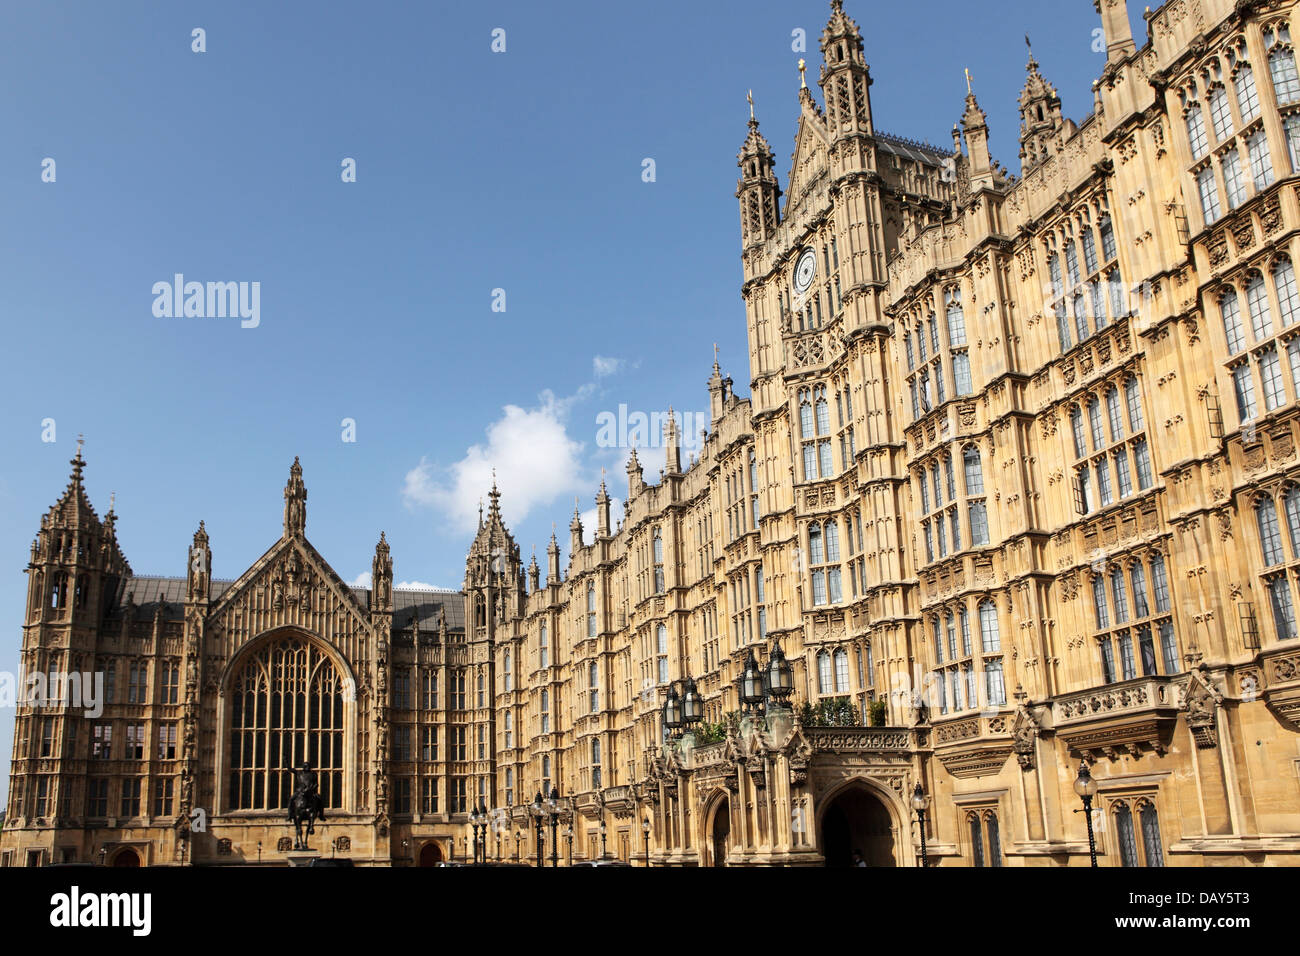 The Houses of Parliament (Palace of Westminster) in London, England. Stock Photo